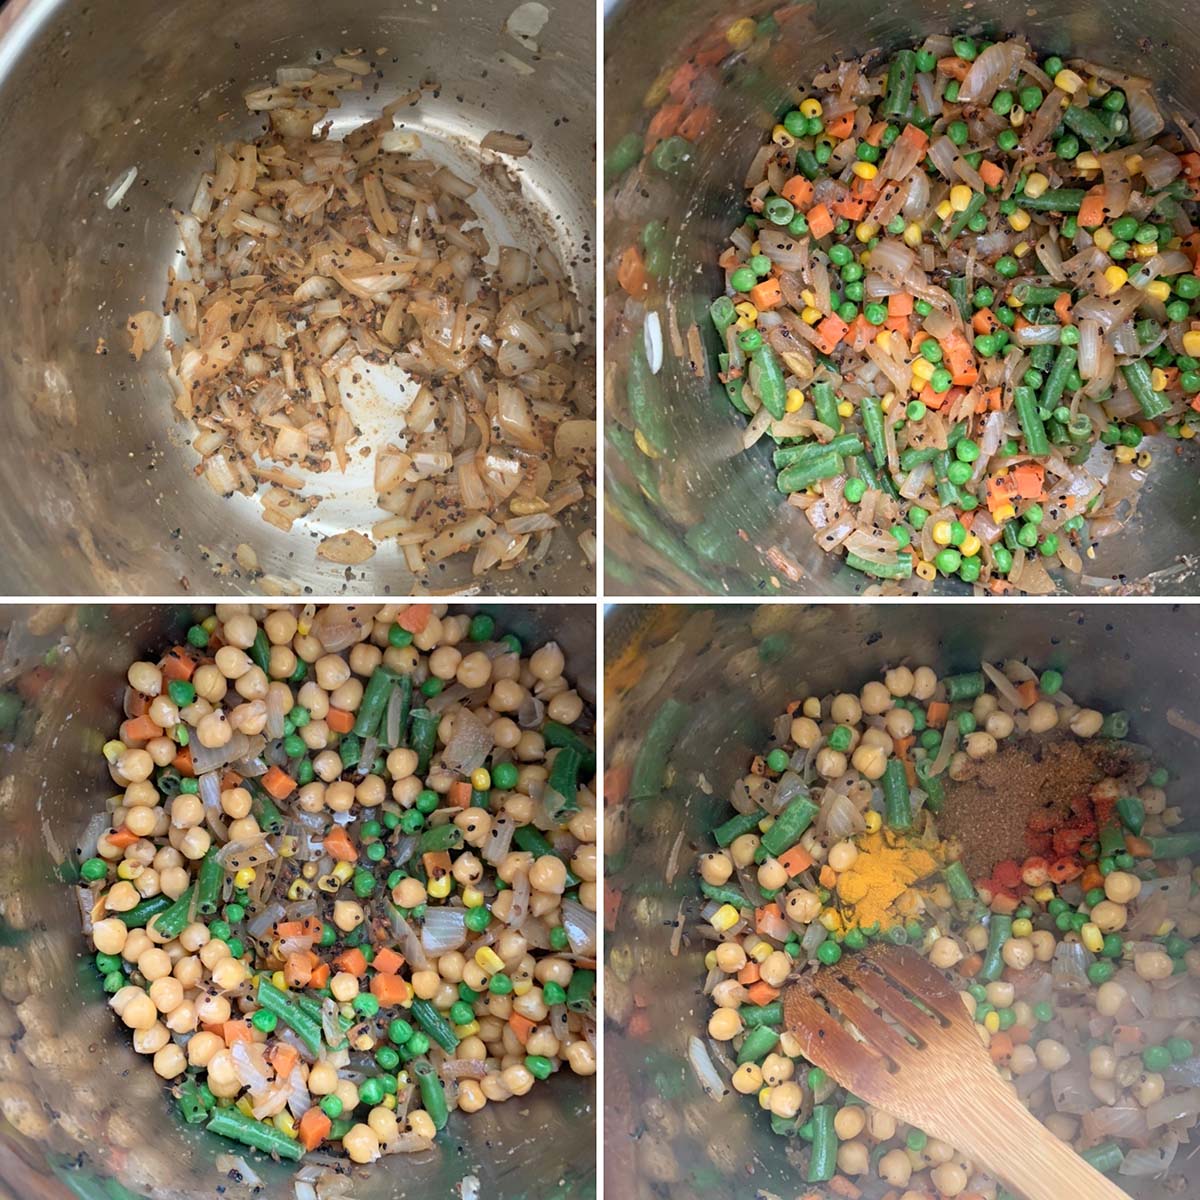 Step by step photos showing sauteed spices, onions, mixed veggies, chickpeas and ground spices